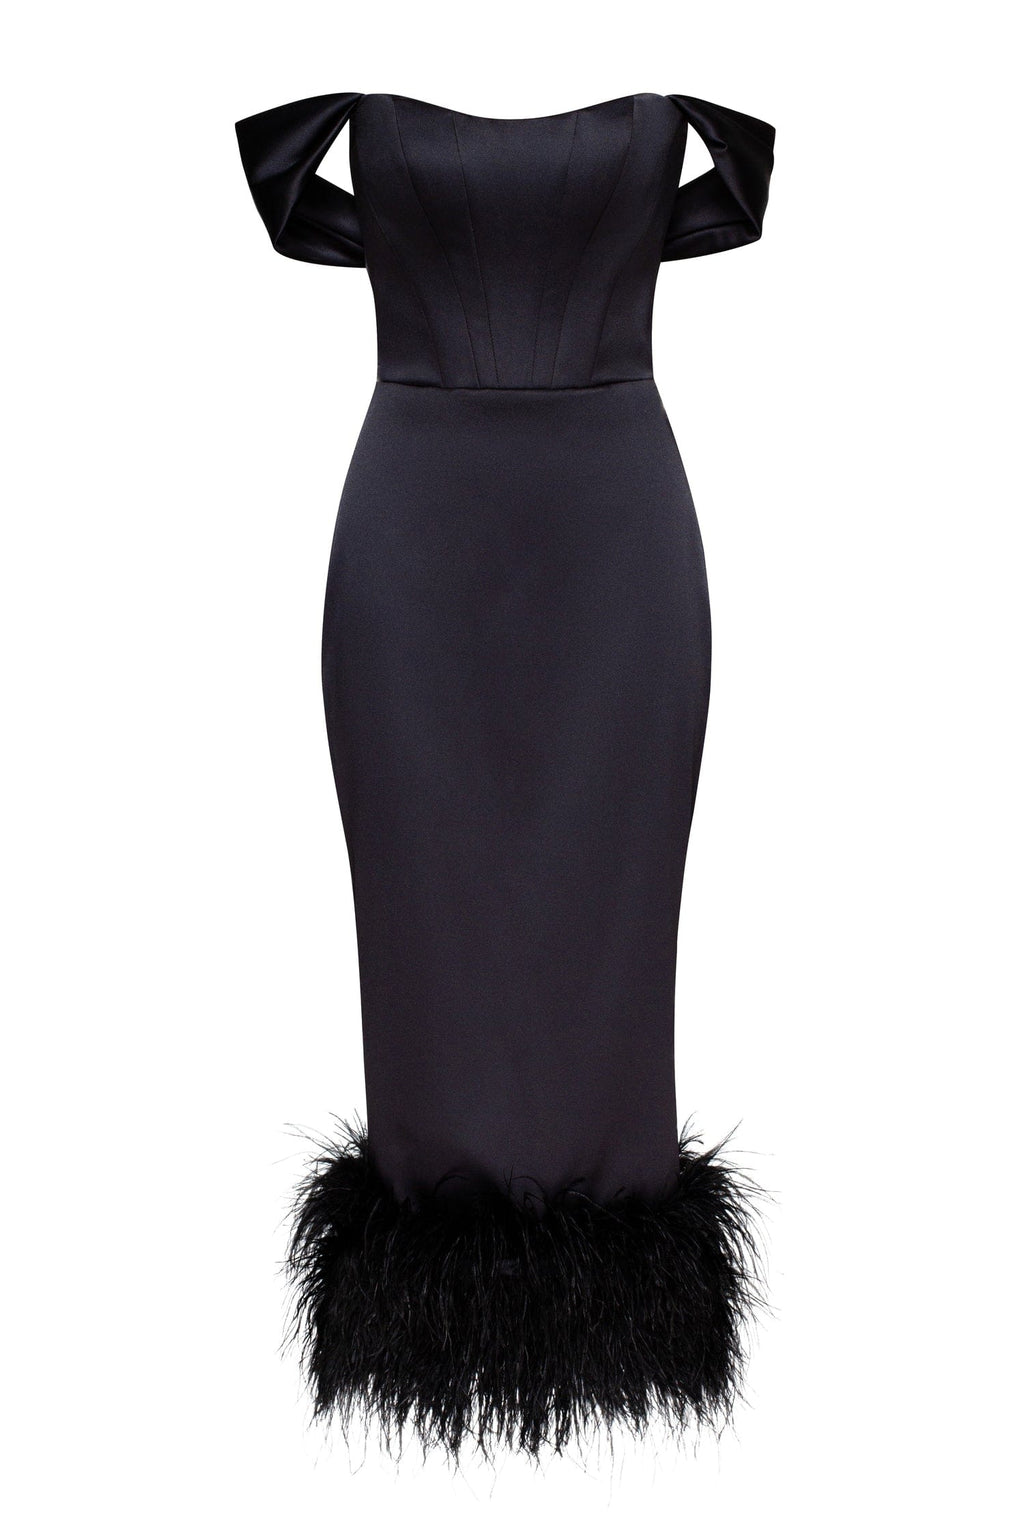 Off the shoulder cocktail feather dress - Milla